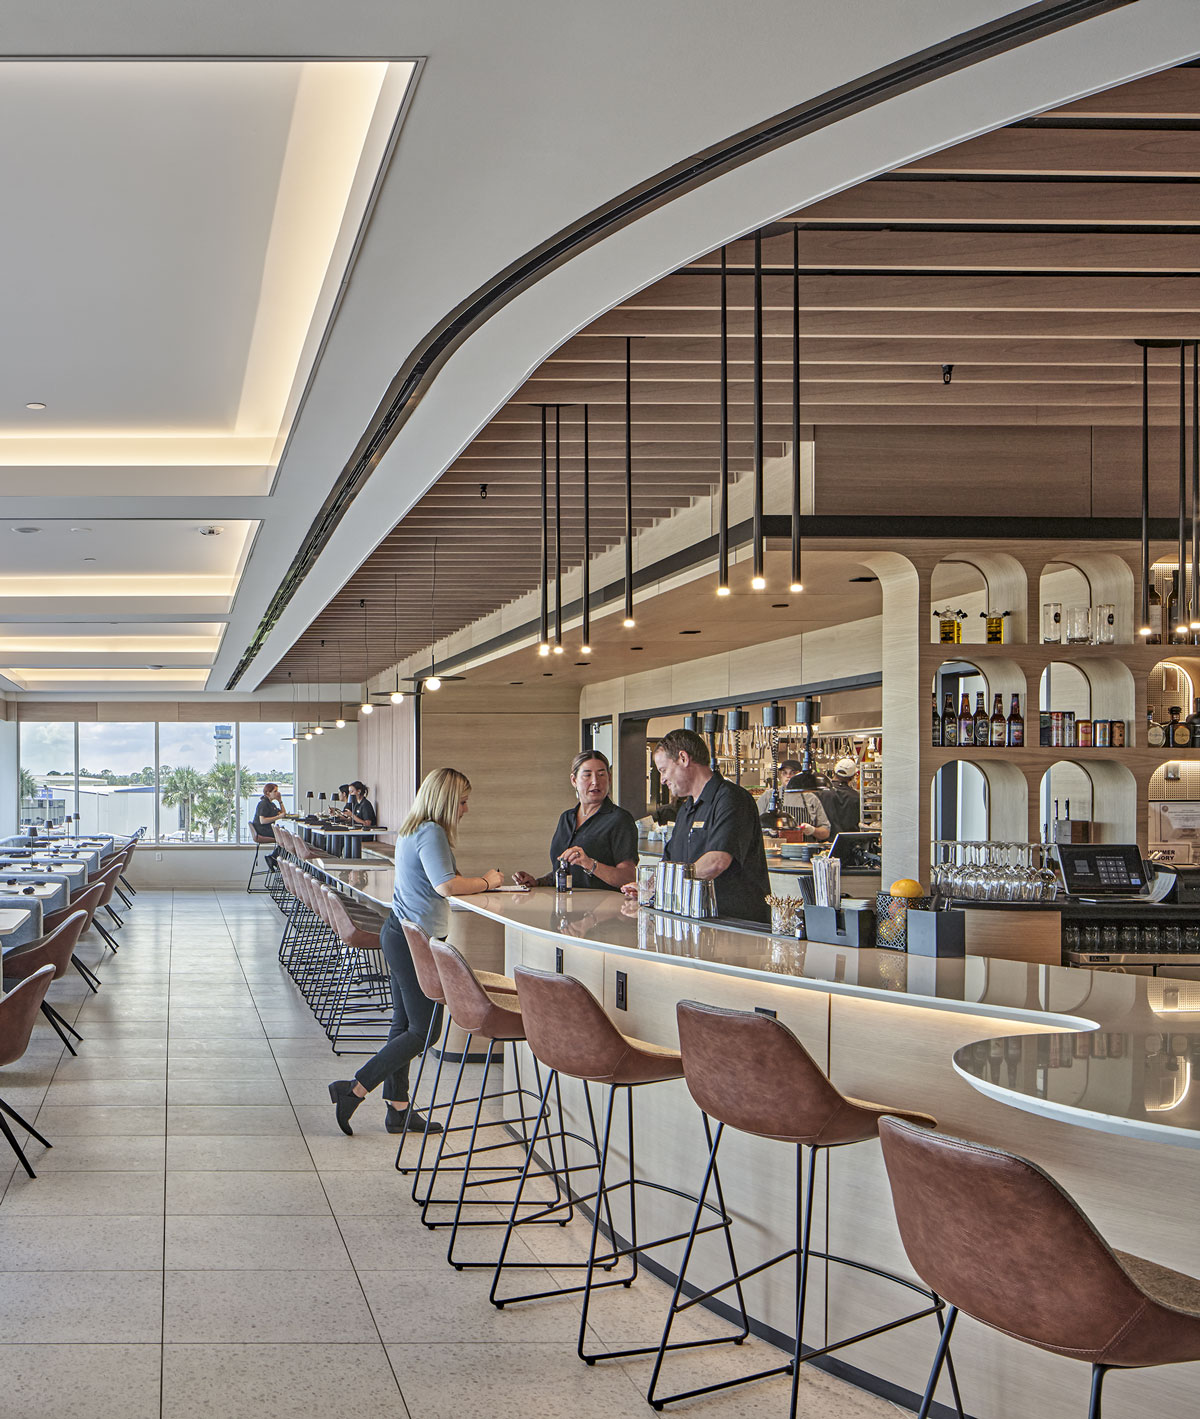 Vibia The Edit - Minimalism and comfort: a restaurant with view of Florida